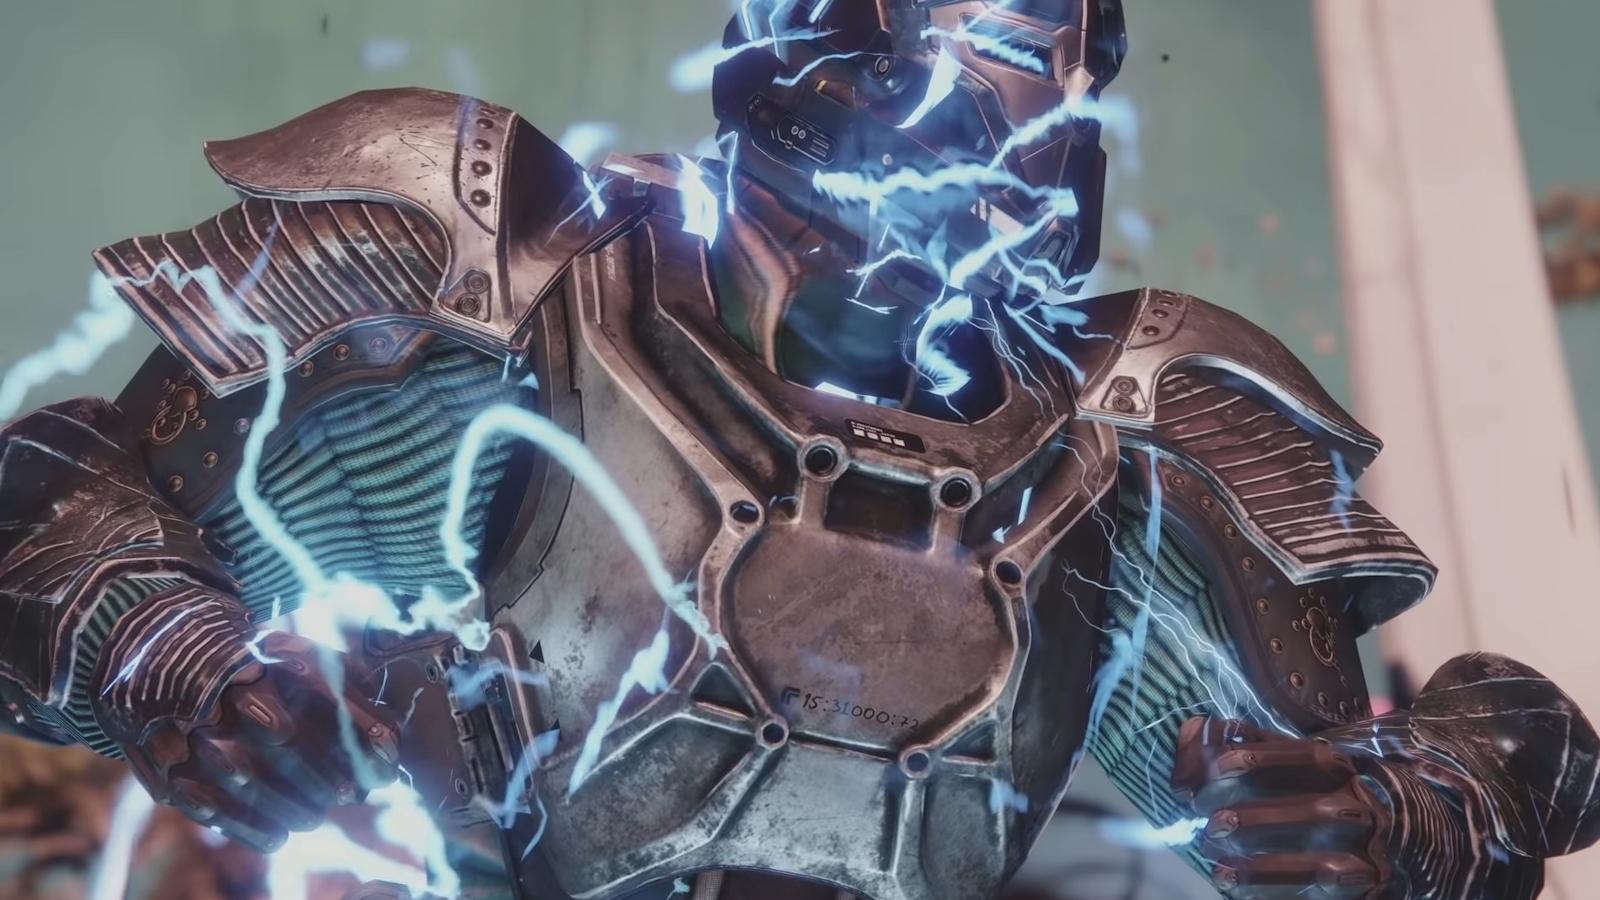 An Arc Titan about to use Super in Destiny 2.